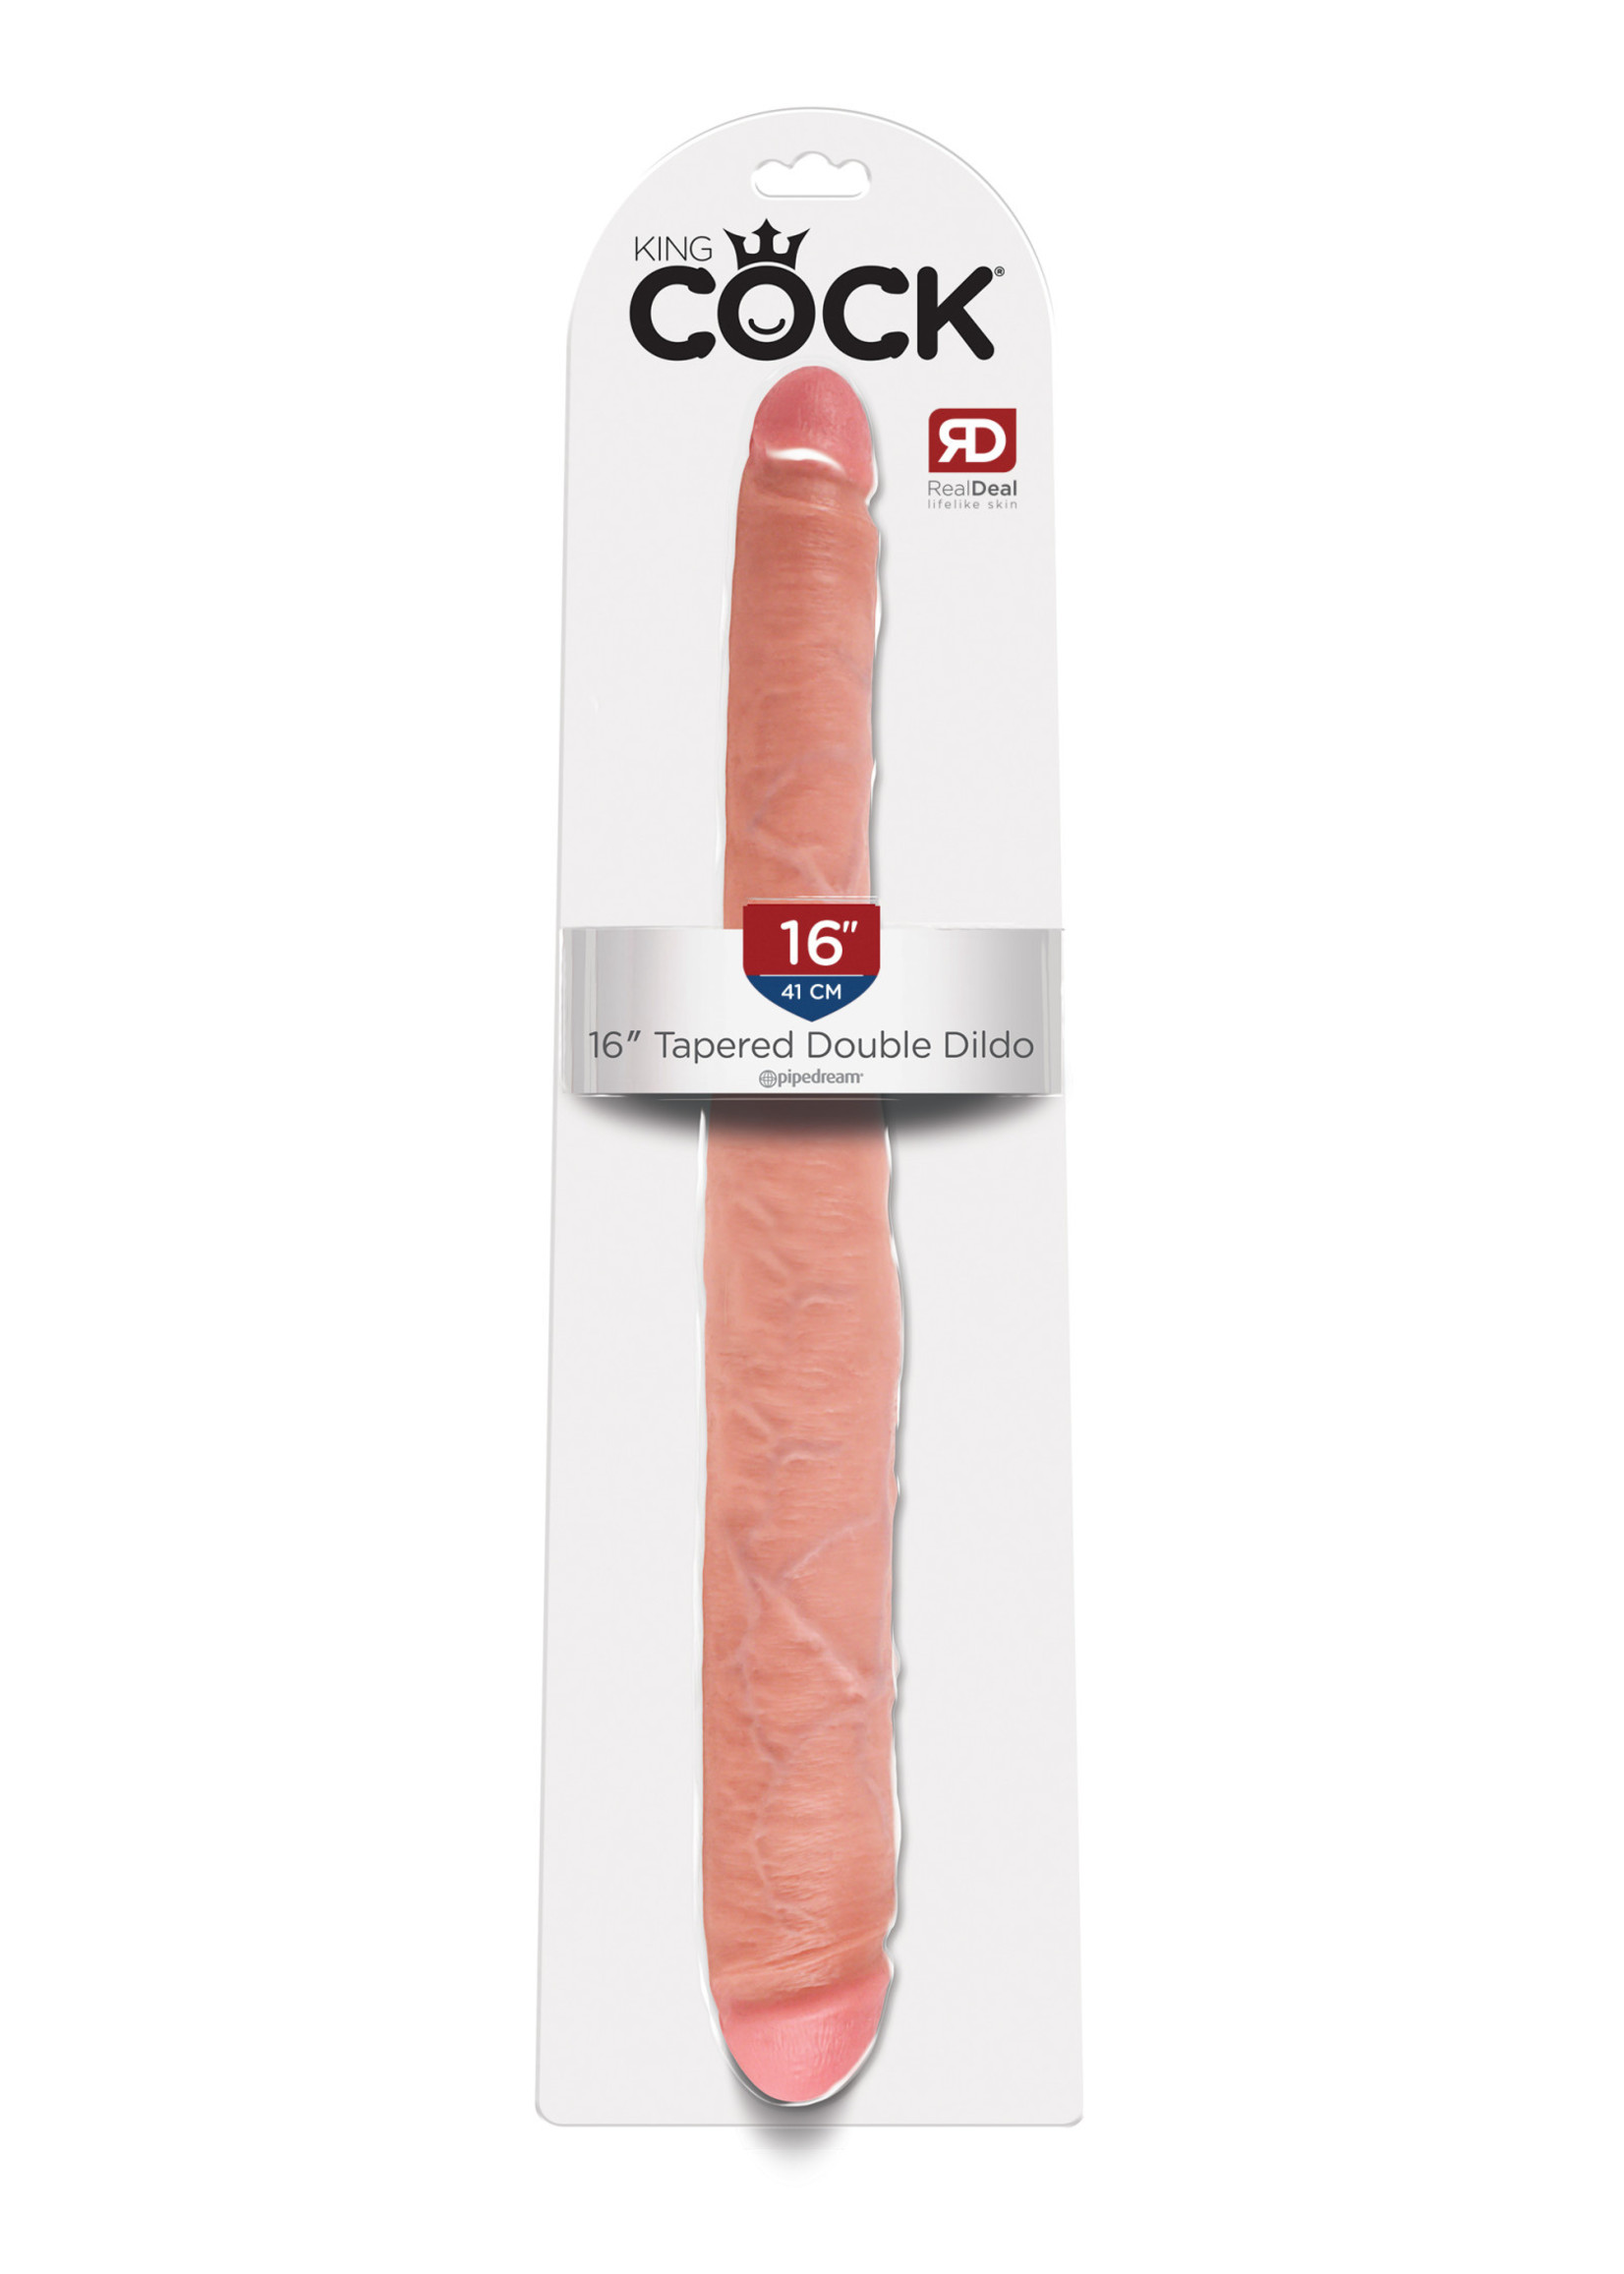 King Cock King Cock Tapered Double Dildo 16"